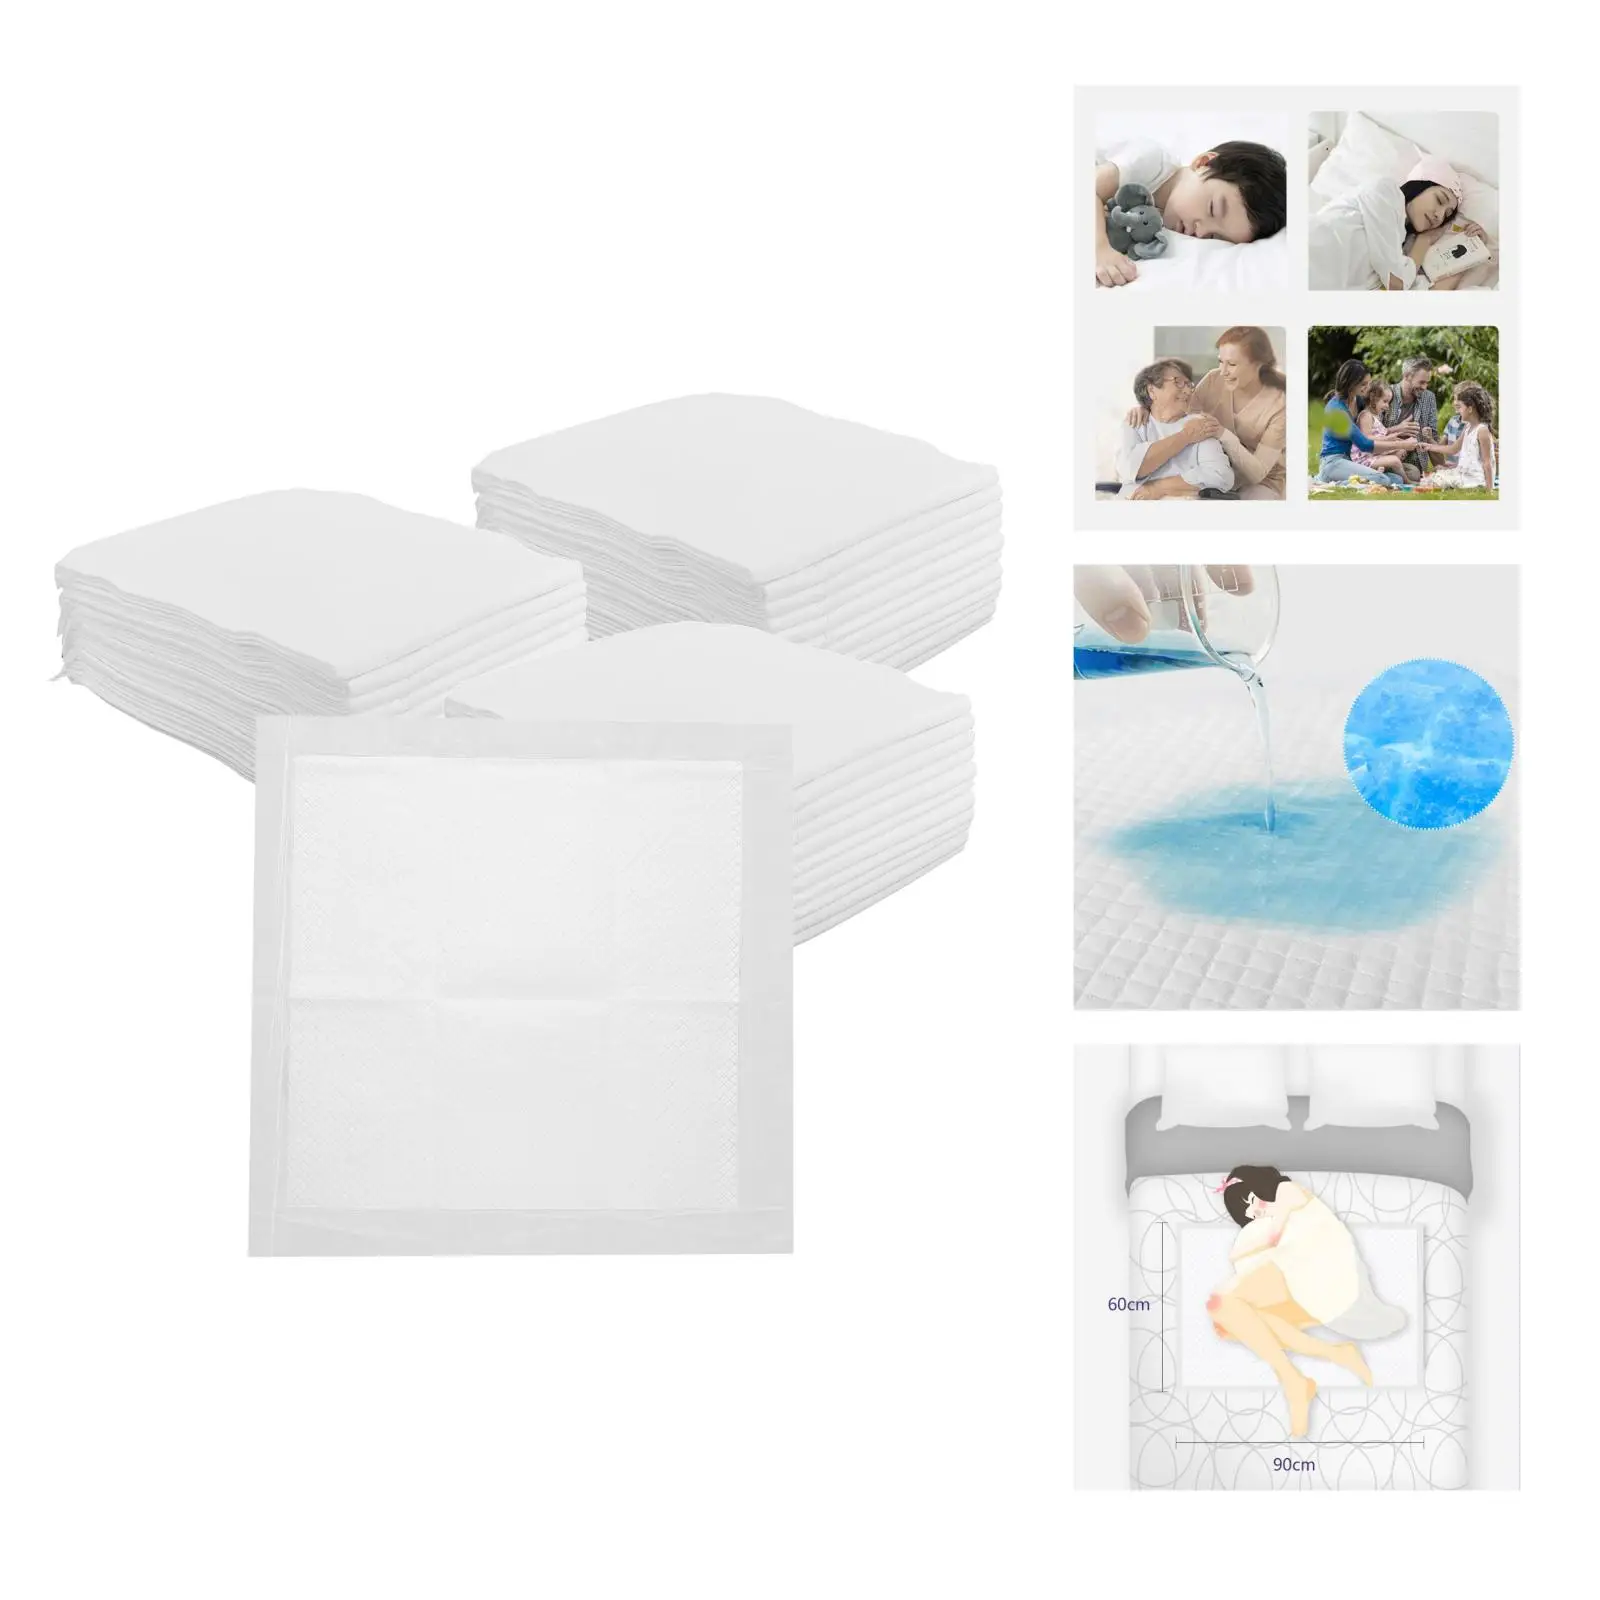 Pack of 30 Absorbent Disposable Incontinence Bed Pads Protection Sheets Baby Changing Mat Covers